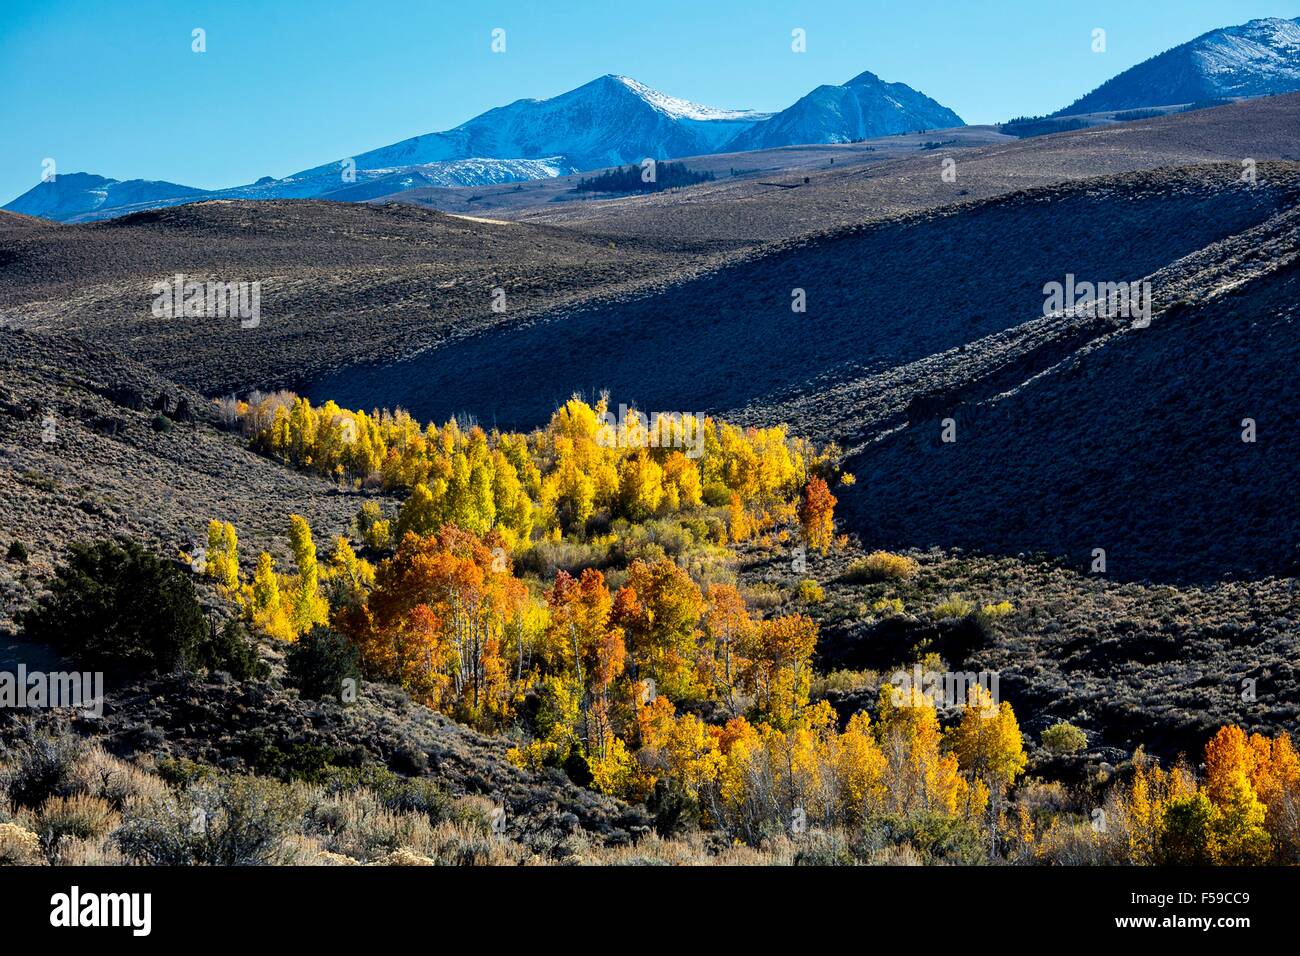 Autumn colors explode in the Conway Summit with the backdrop of the mountains of the Ansel Adams Wilderness and Yosemite National Park in Mono County, California. Stock Photo